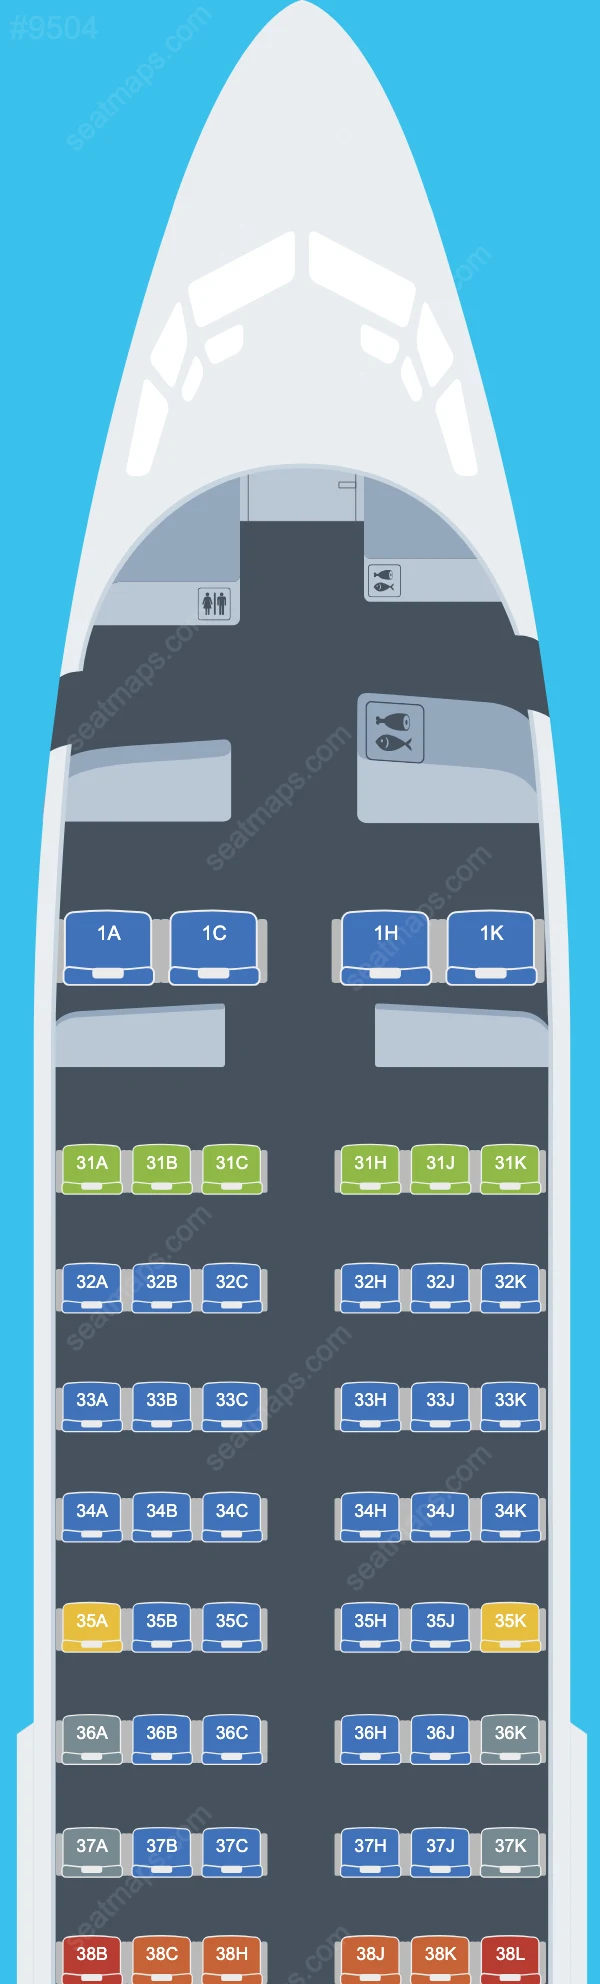 China Southern Boeing 737-700 V.4 seatmap mobile preview